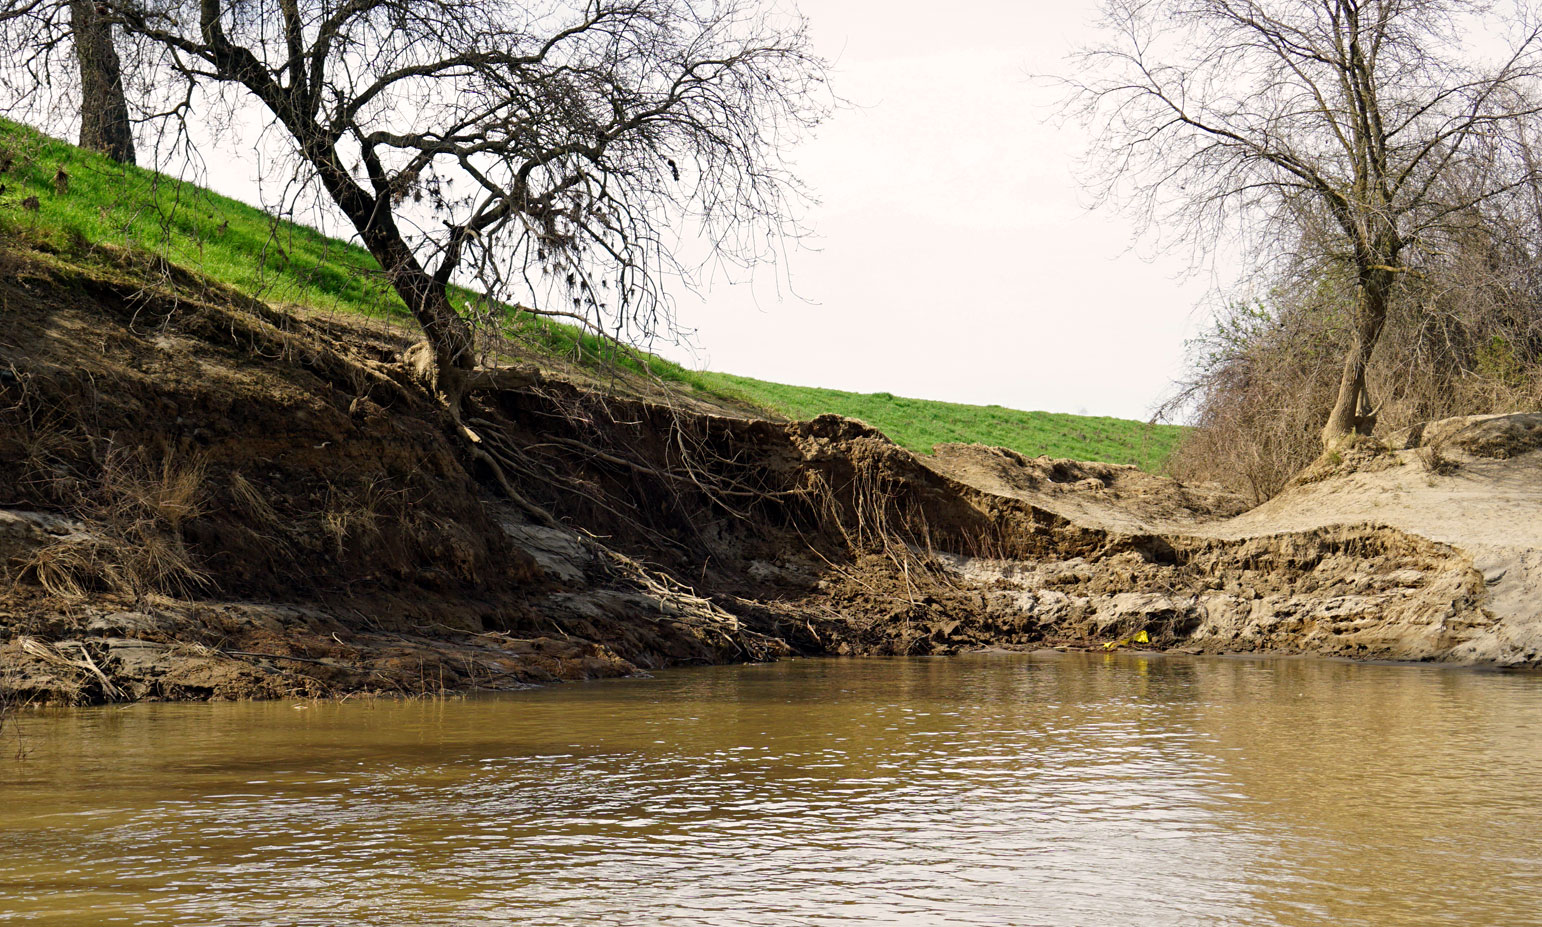 A damaged levee on the Feather River, downstream of Oroville Dam.